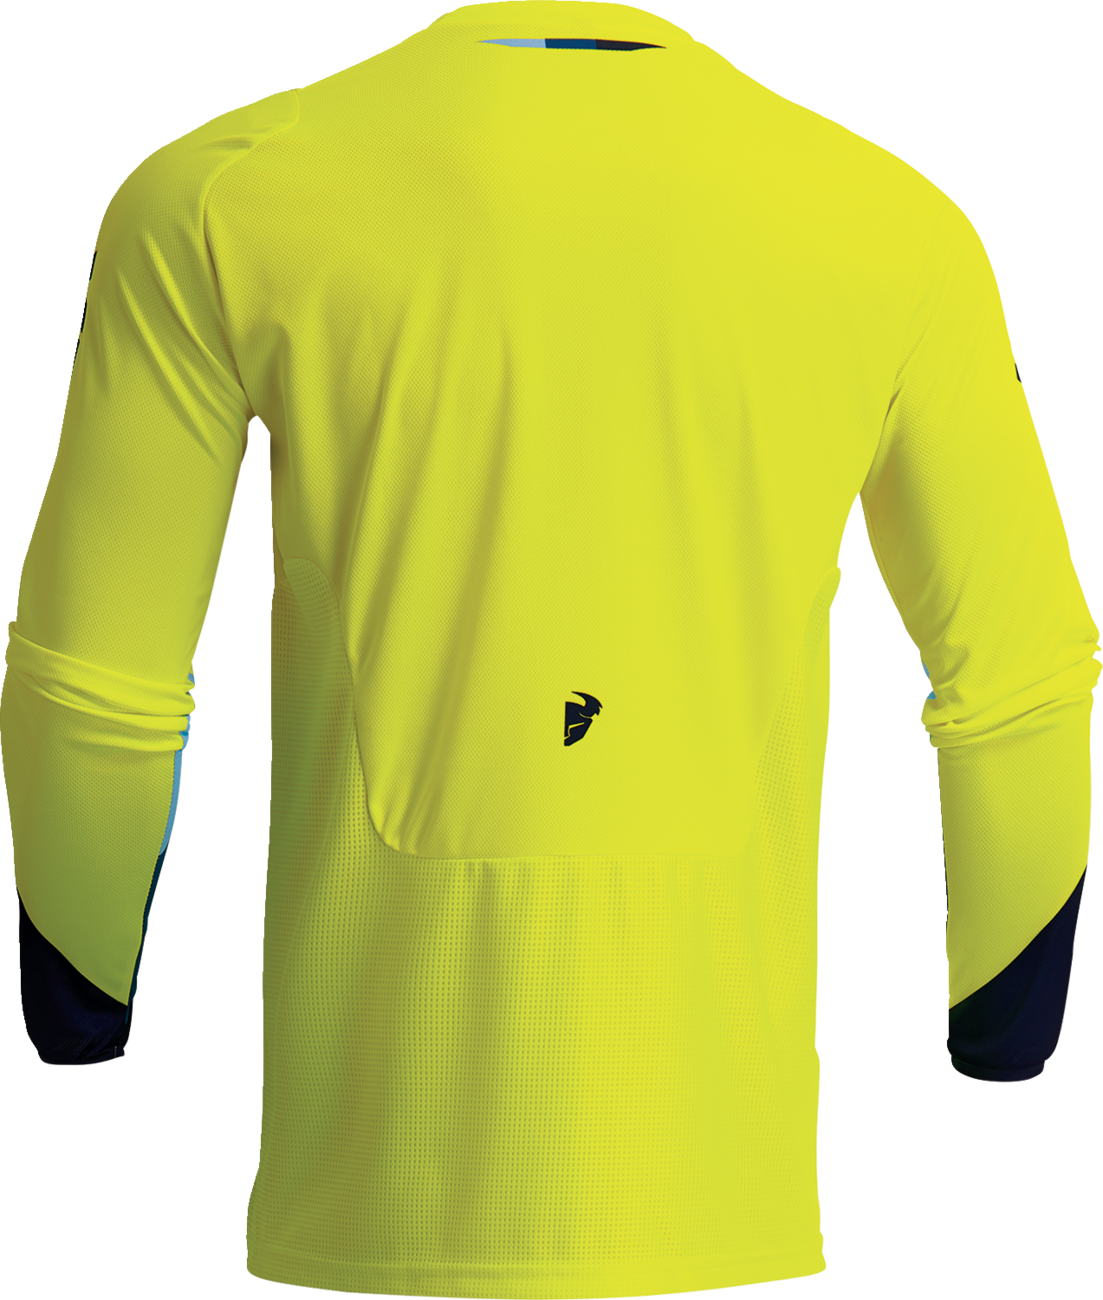 THOR Youth Pulse Tactic Jersey - Acid - Small 2912-2193